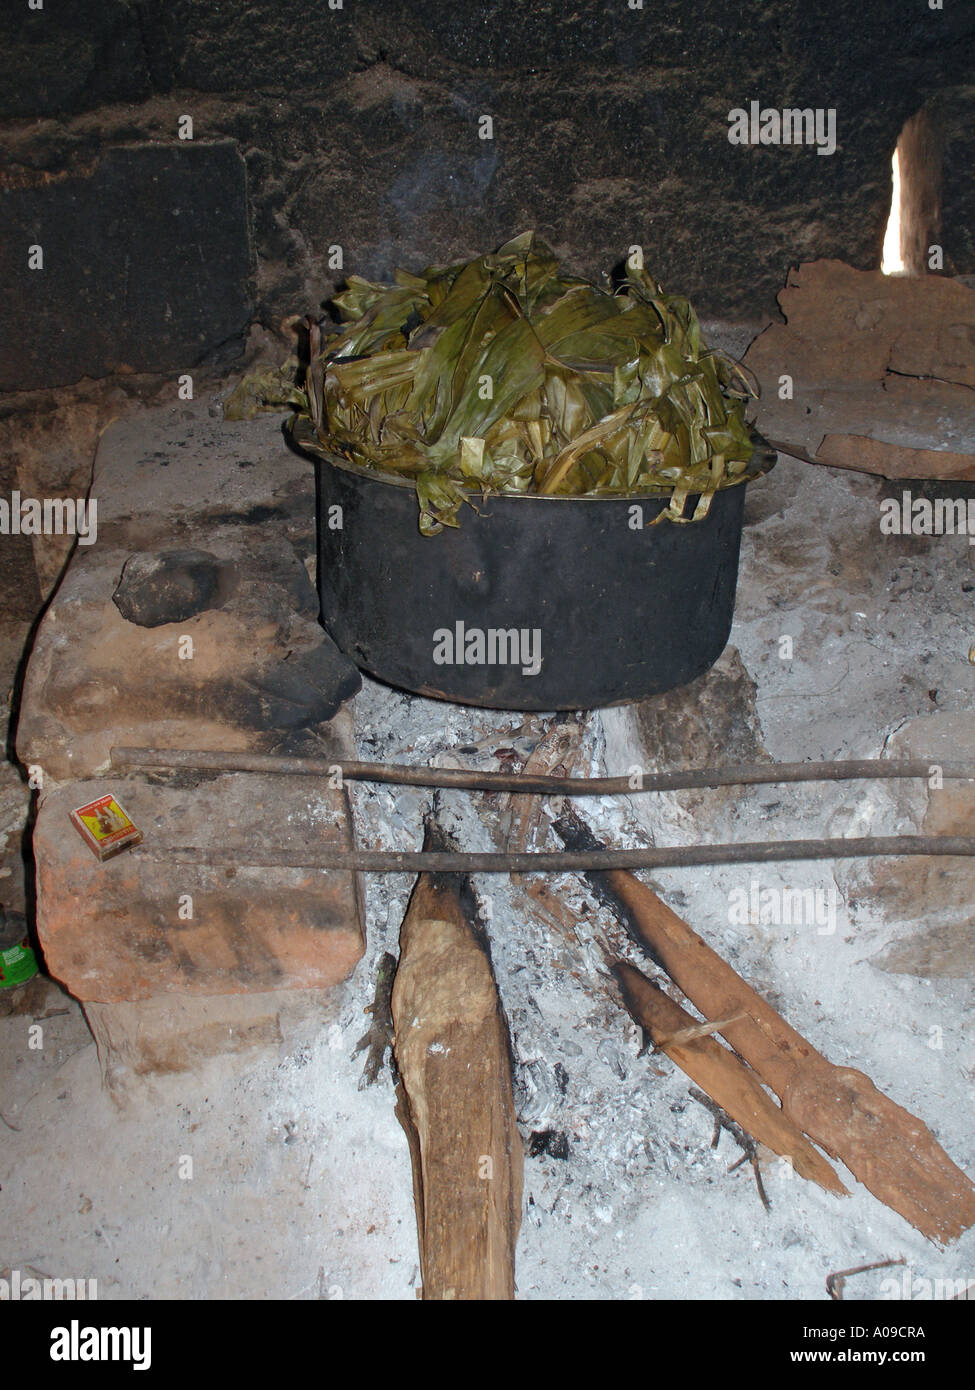 Steaming plantain (matooke) wrapped in banana leaves on firewood Stock Photo